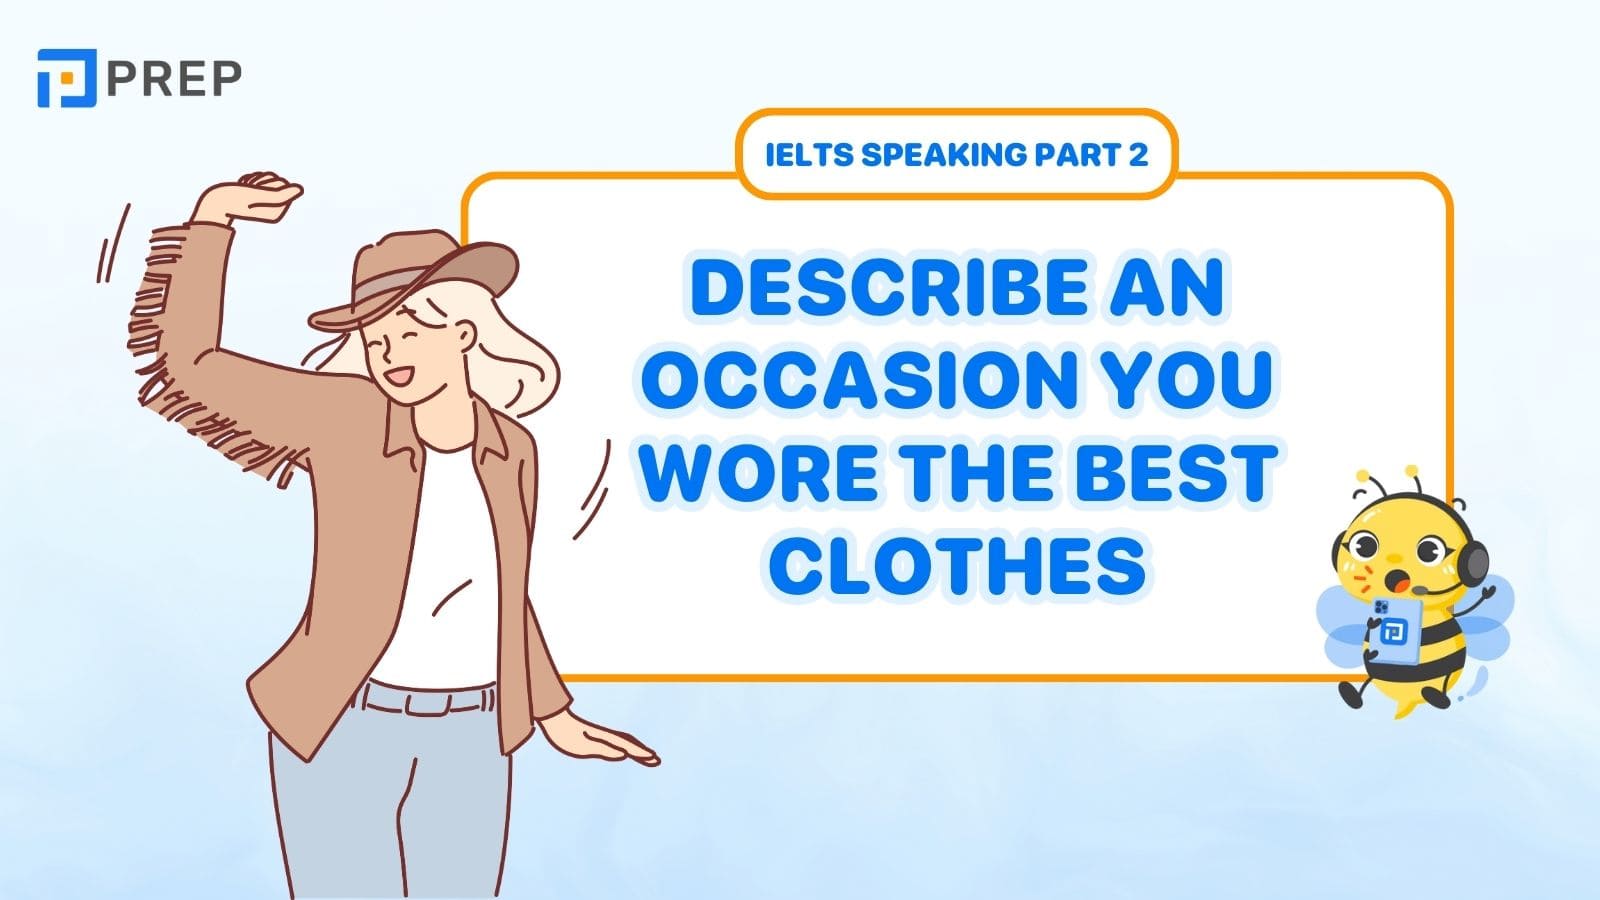 Describe an occasion you wore the best clothes